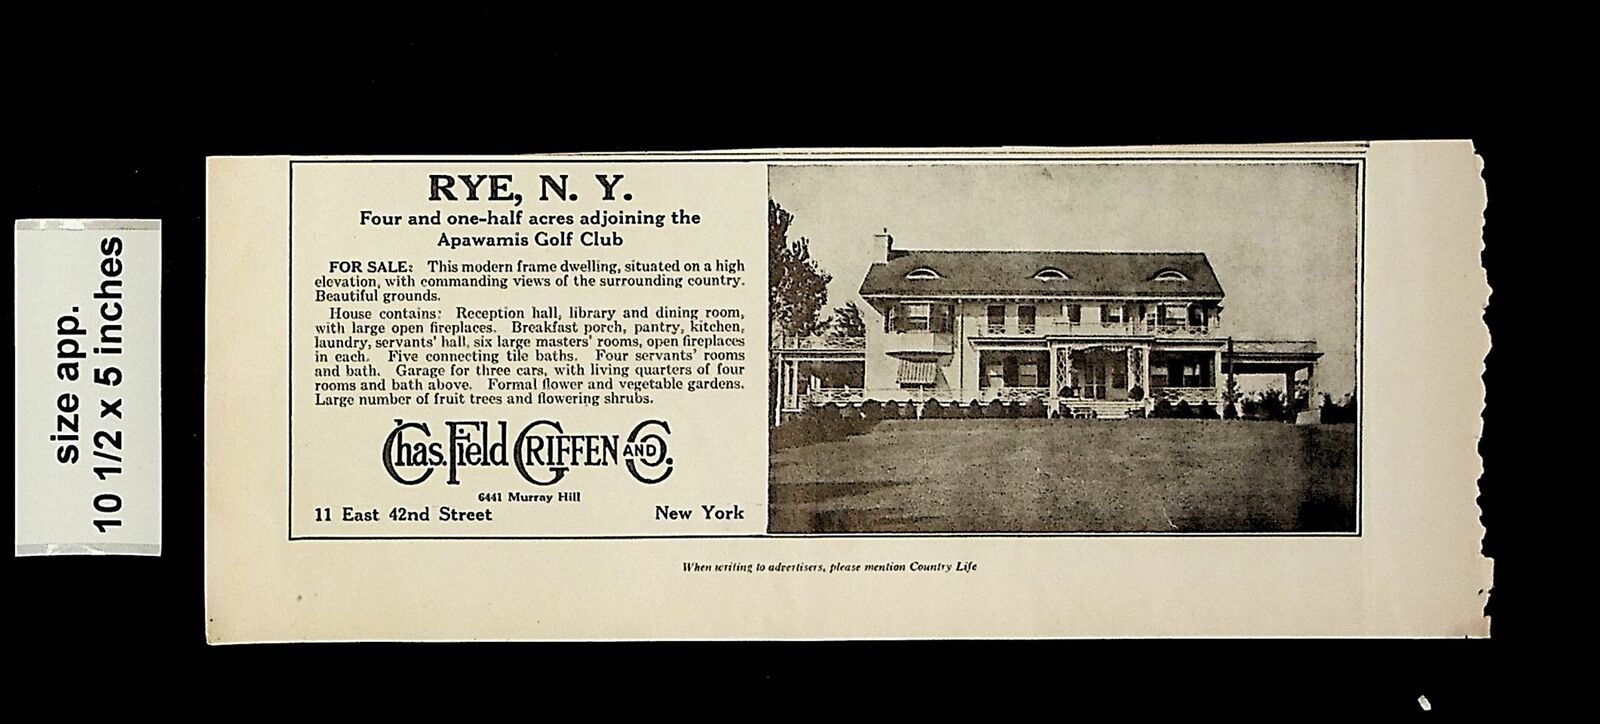 1919 Chas Field Griffen and Co Rye NY Real Estate Vintage Print ad 14492